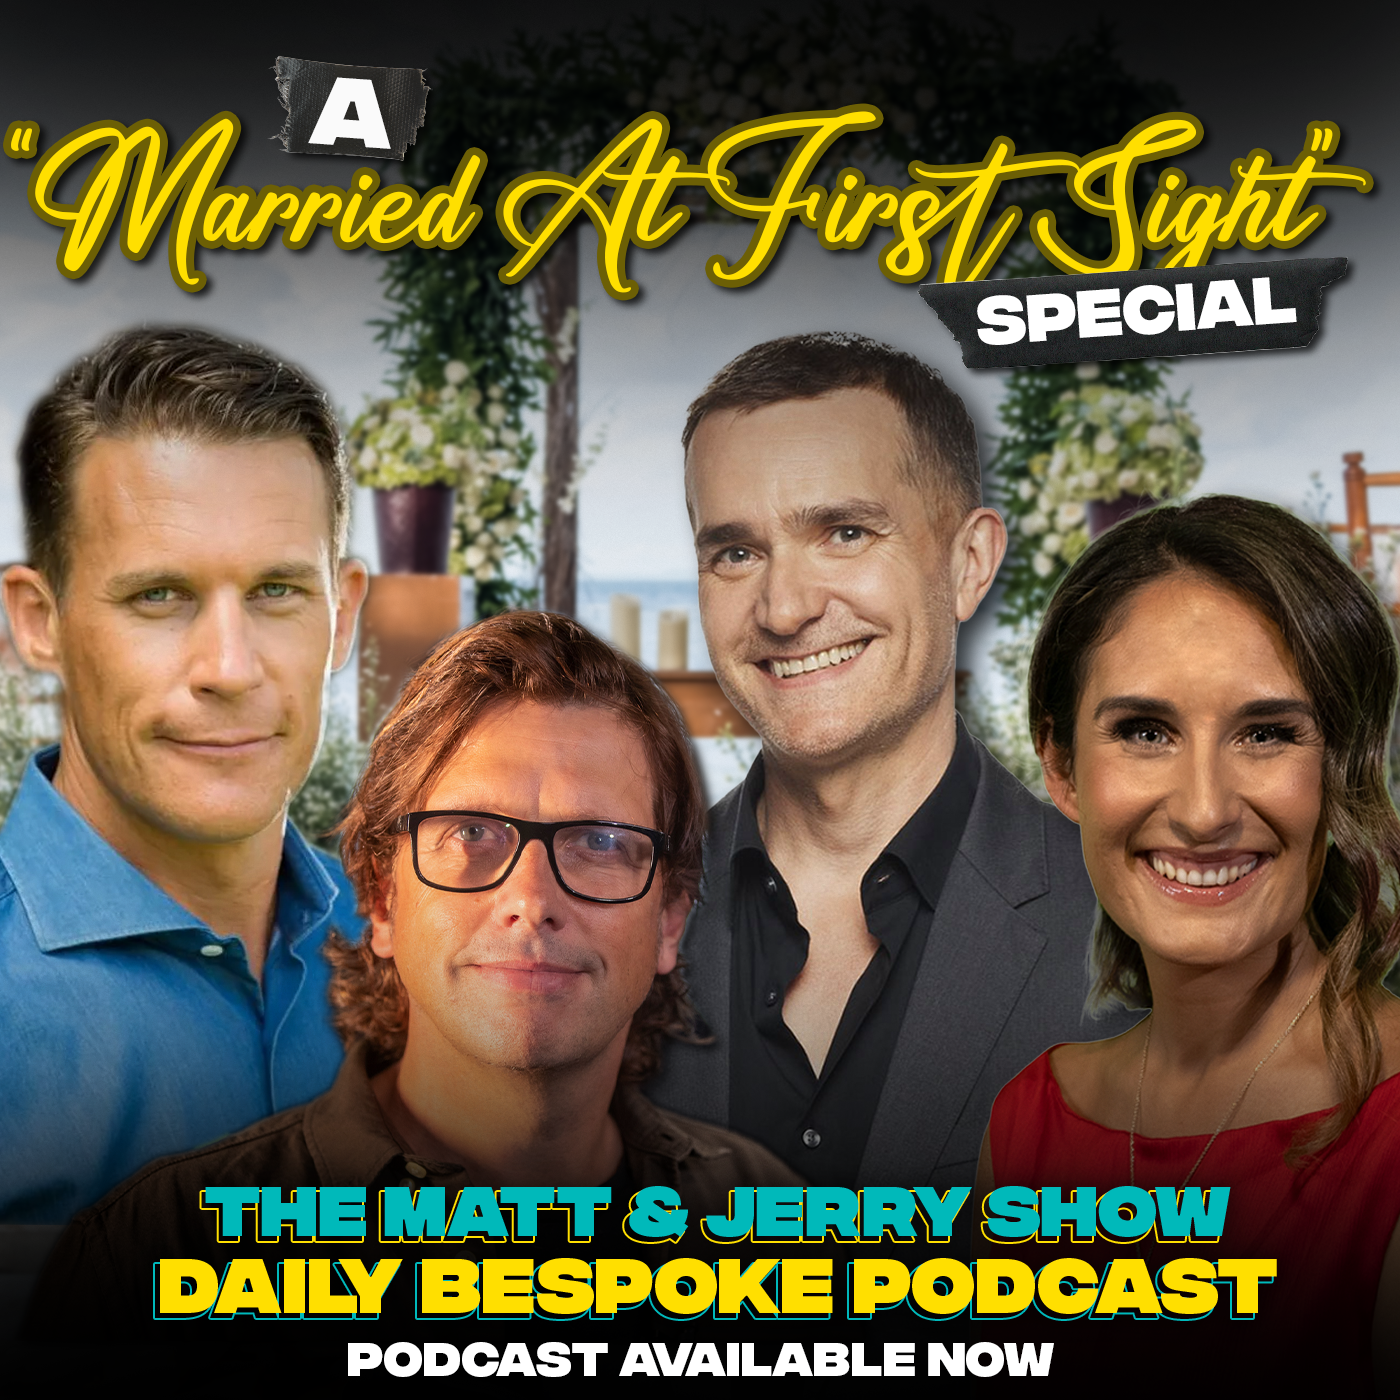 Getting Married At First Sight - The Daily Bespoke May 24